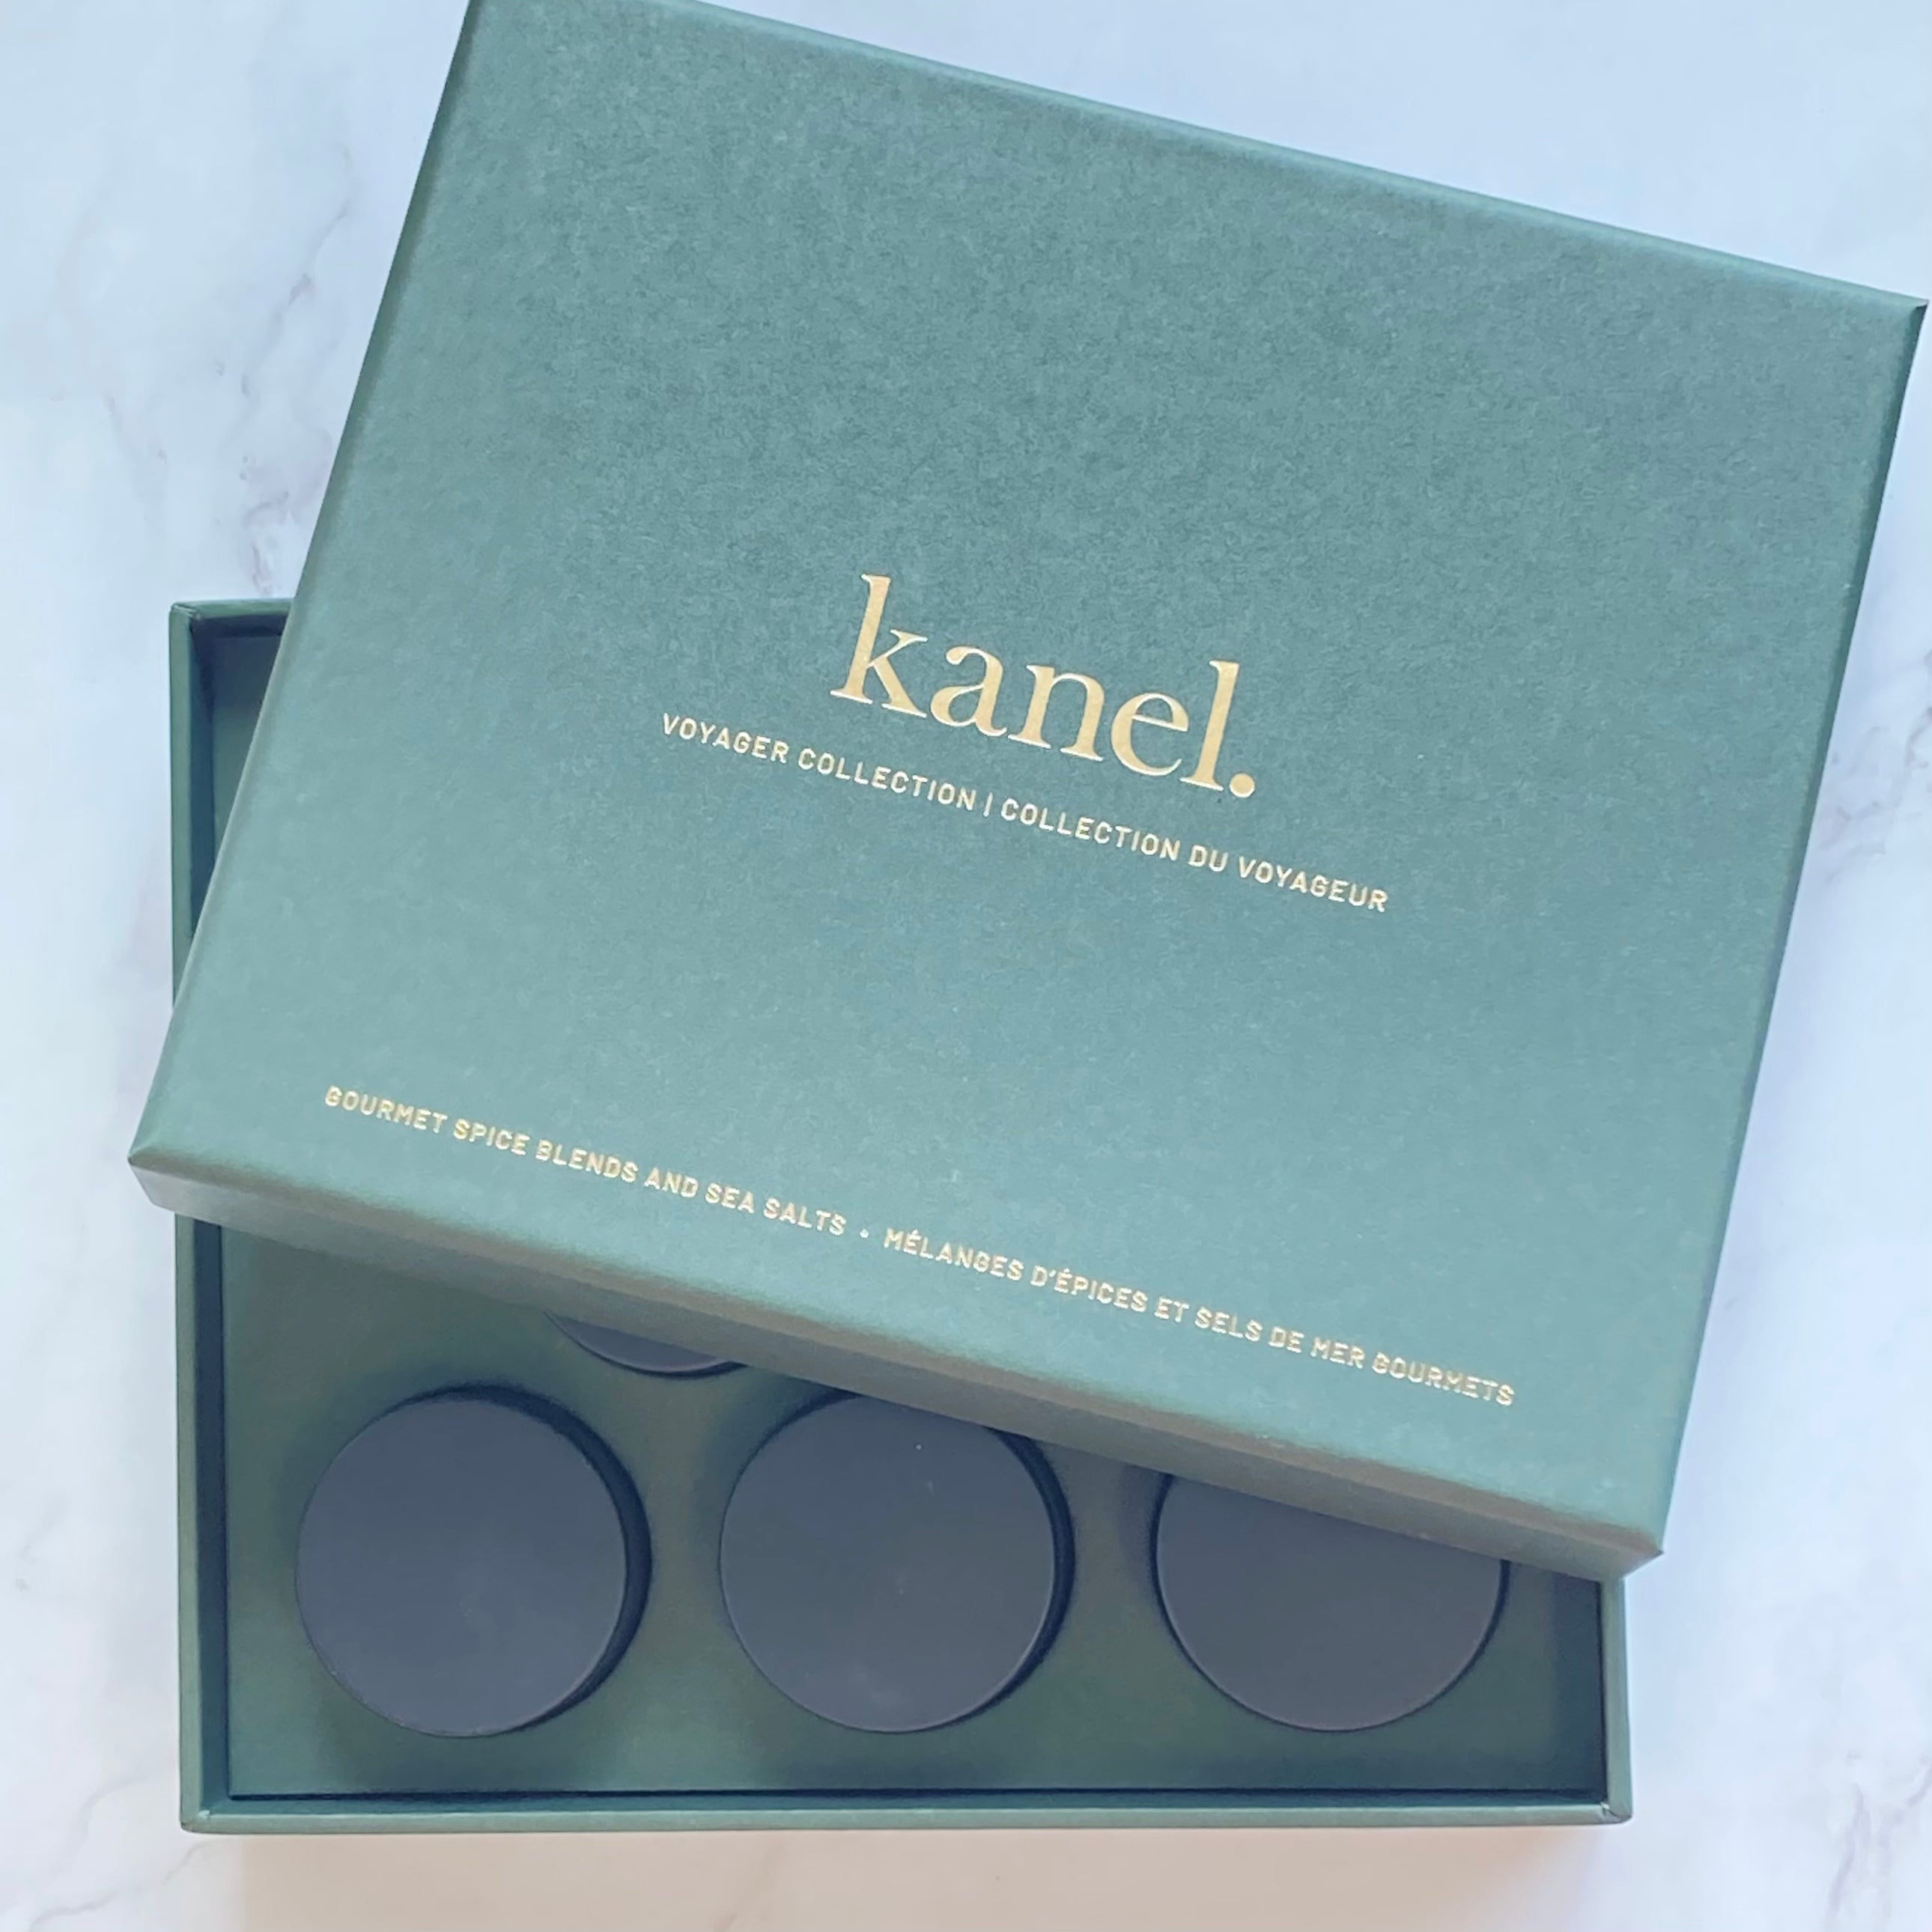 Kanel Spice Collection Boxes